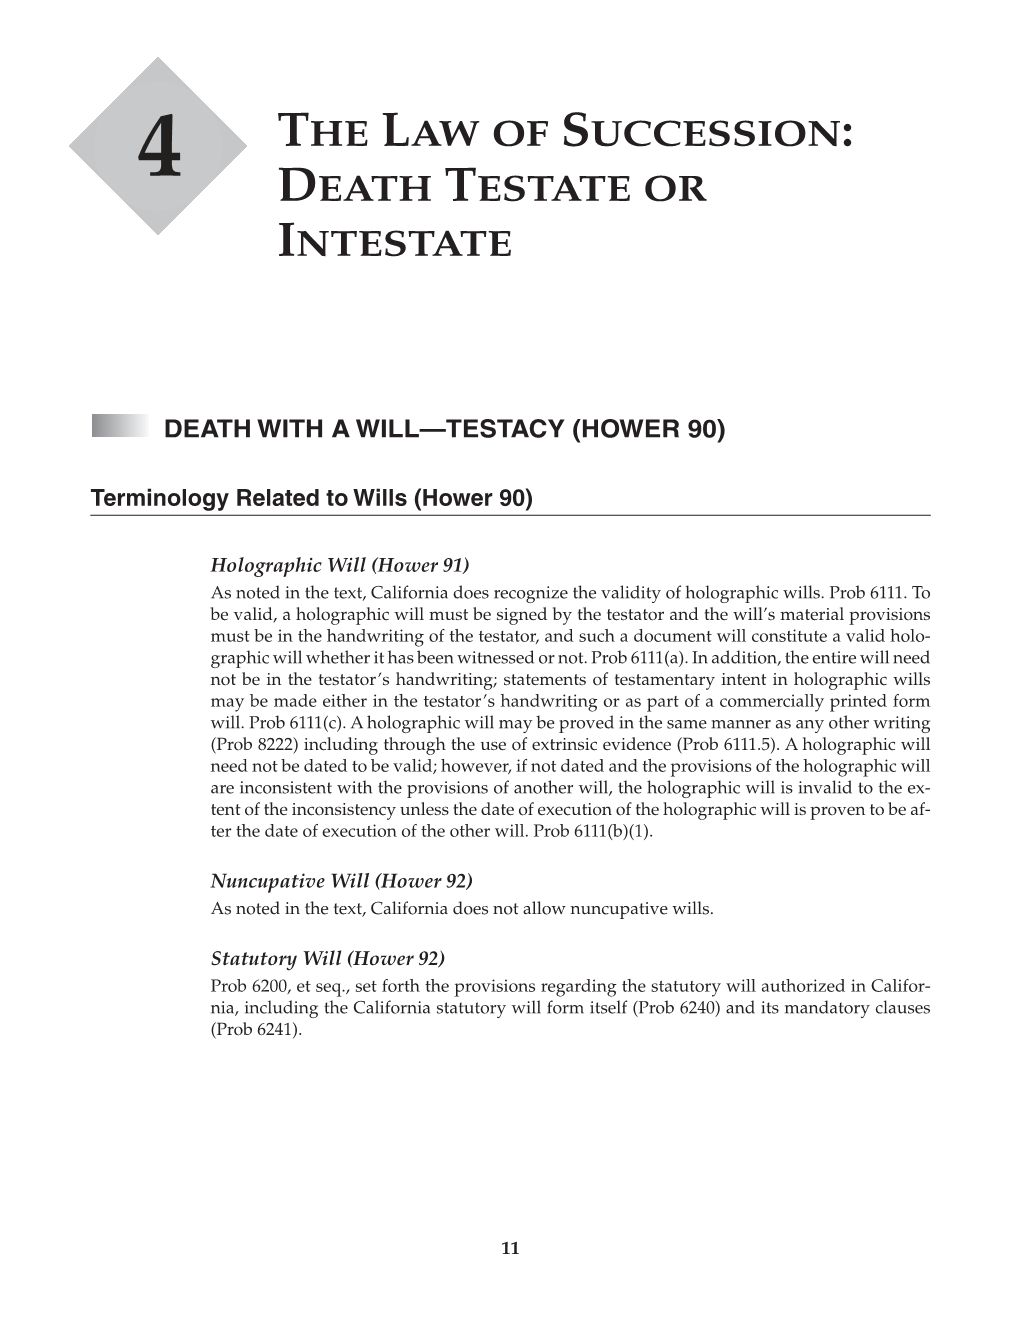 The Law of Succession: Death Testate Or Intestate